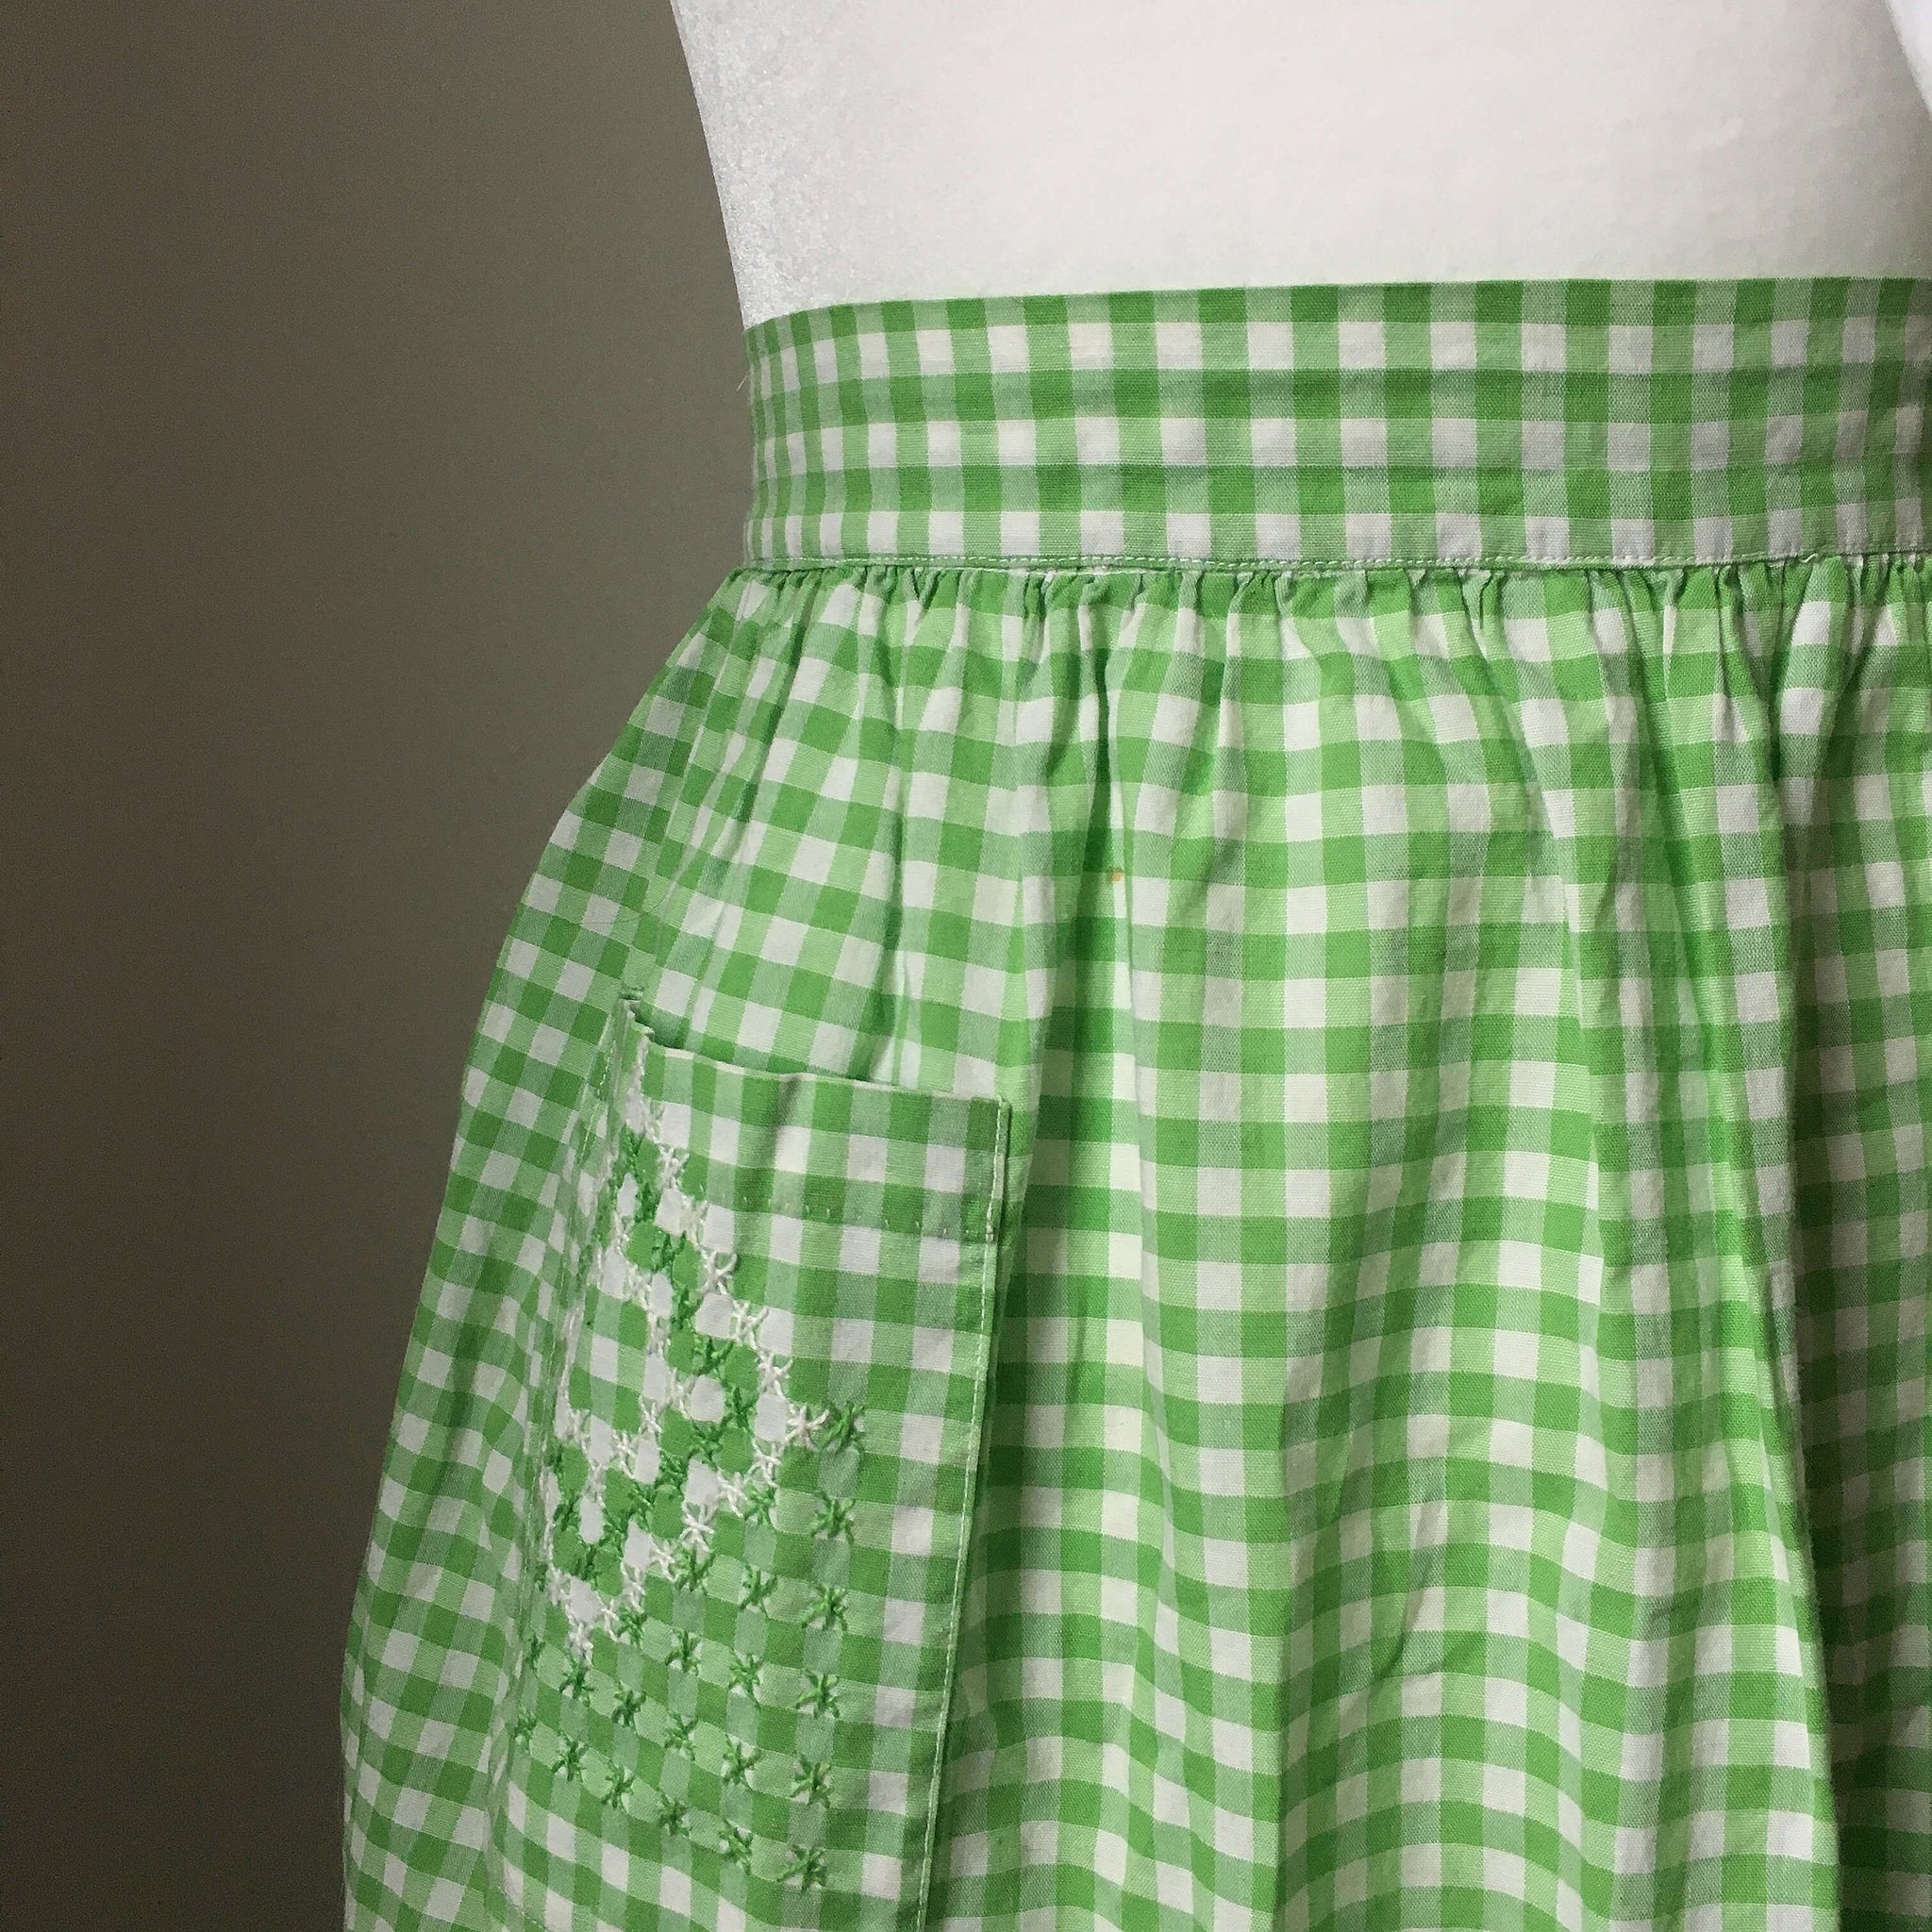 Vintage Green and White Gingham Half Apron with Embroidery - Midcentury Apron